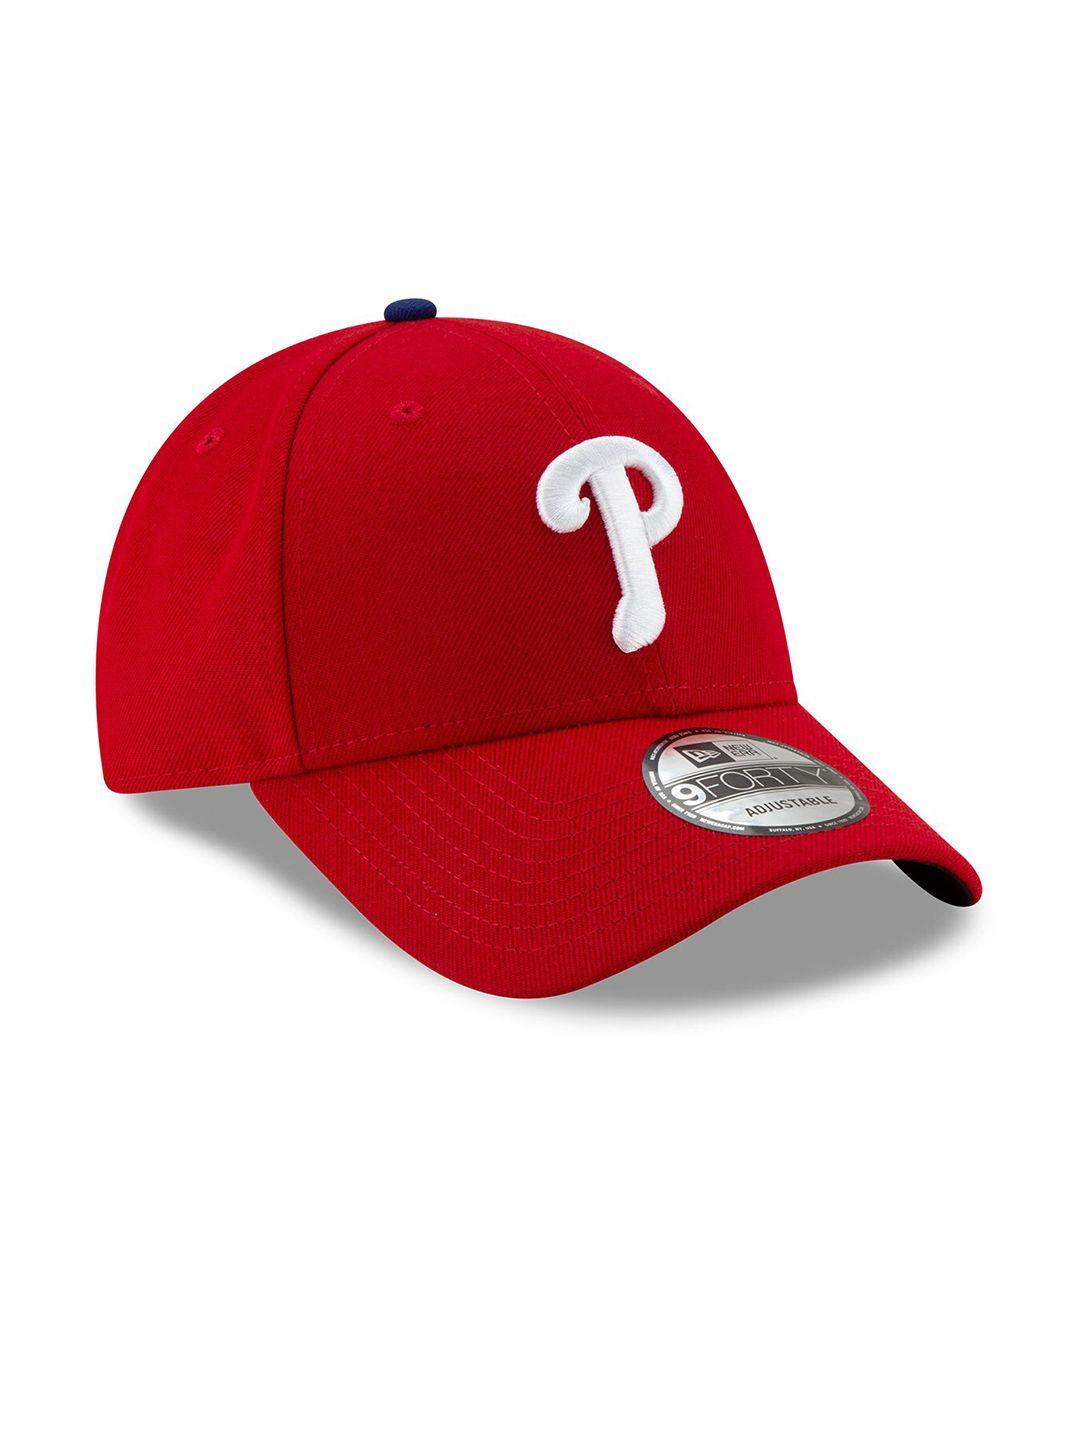 new era philadelphia phillies league red 9forty embroidered baseball cap